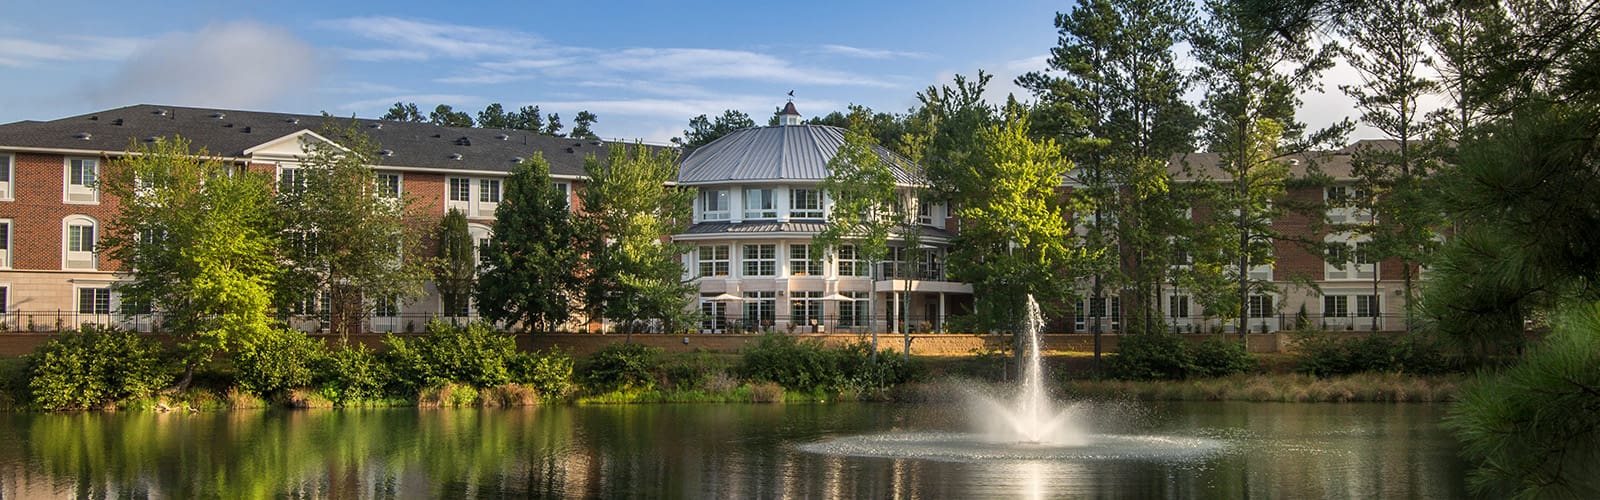 Rear of the Georgian Lakeside building, surrounded by majestic trees and a lake with a fountain shooting up.